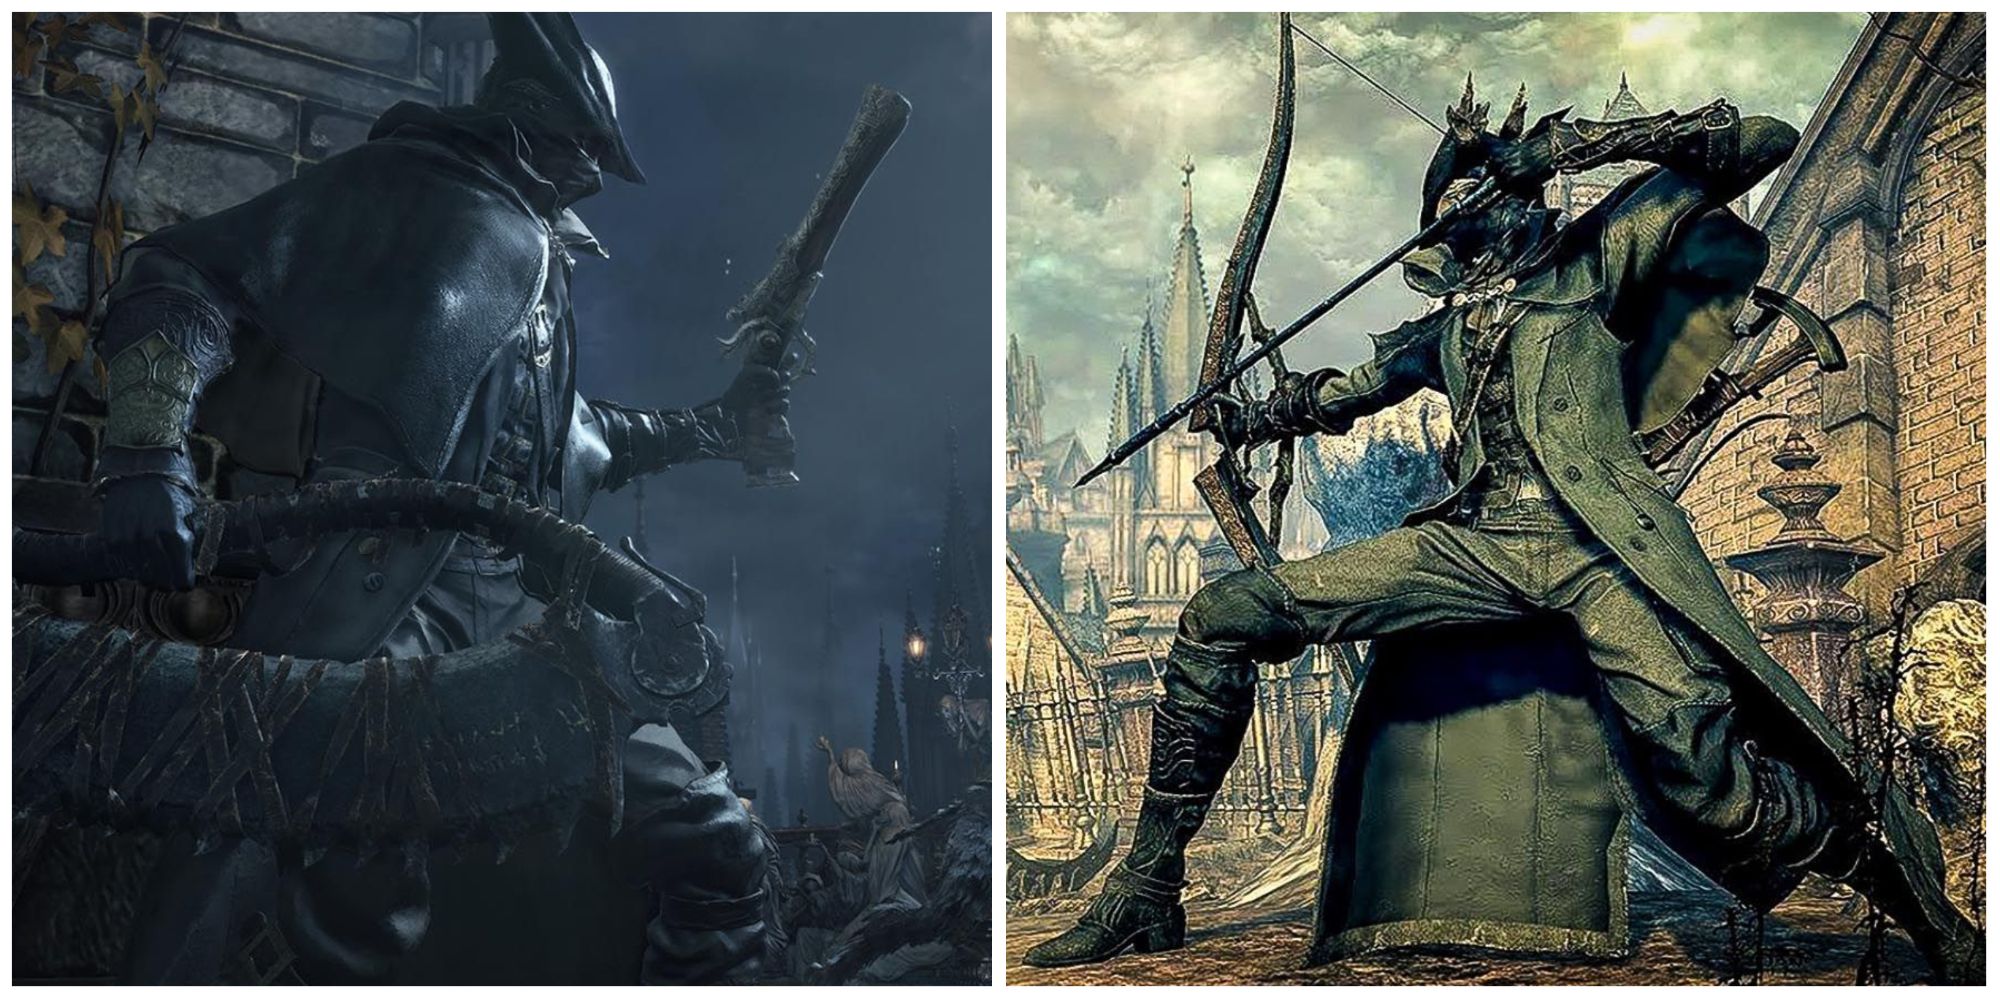 Bloodborne: Best Origin Class For Beginners To Souls-Likes